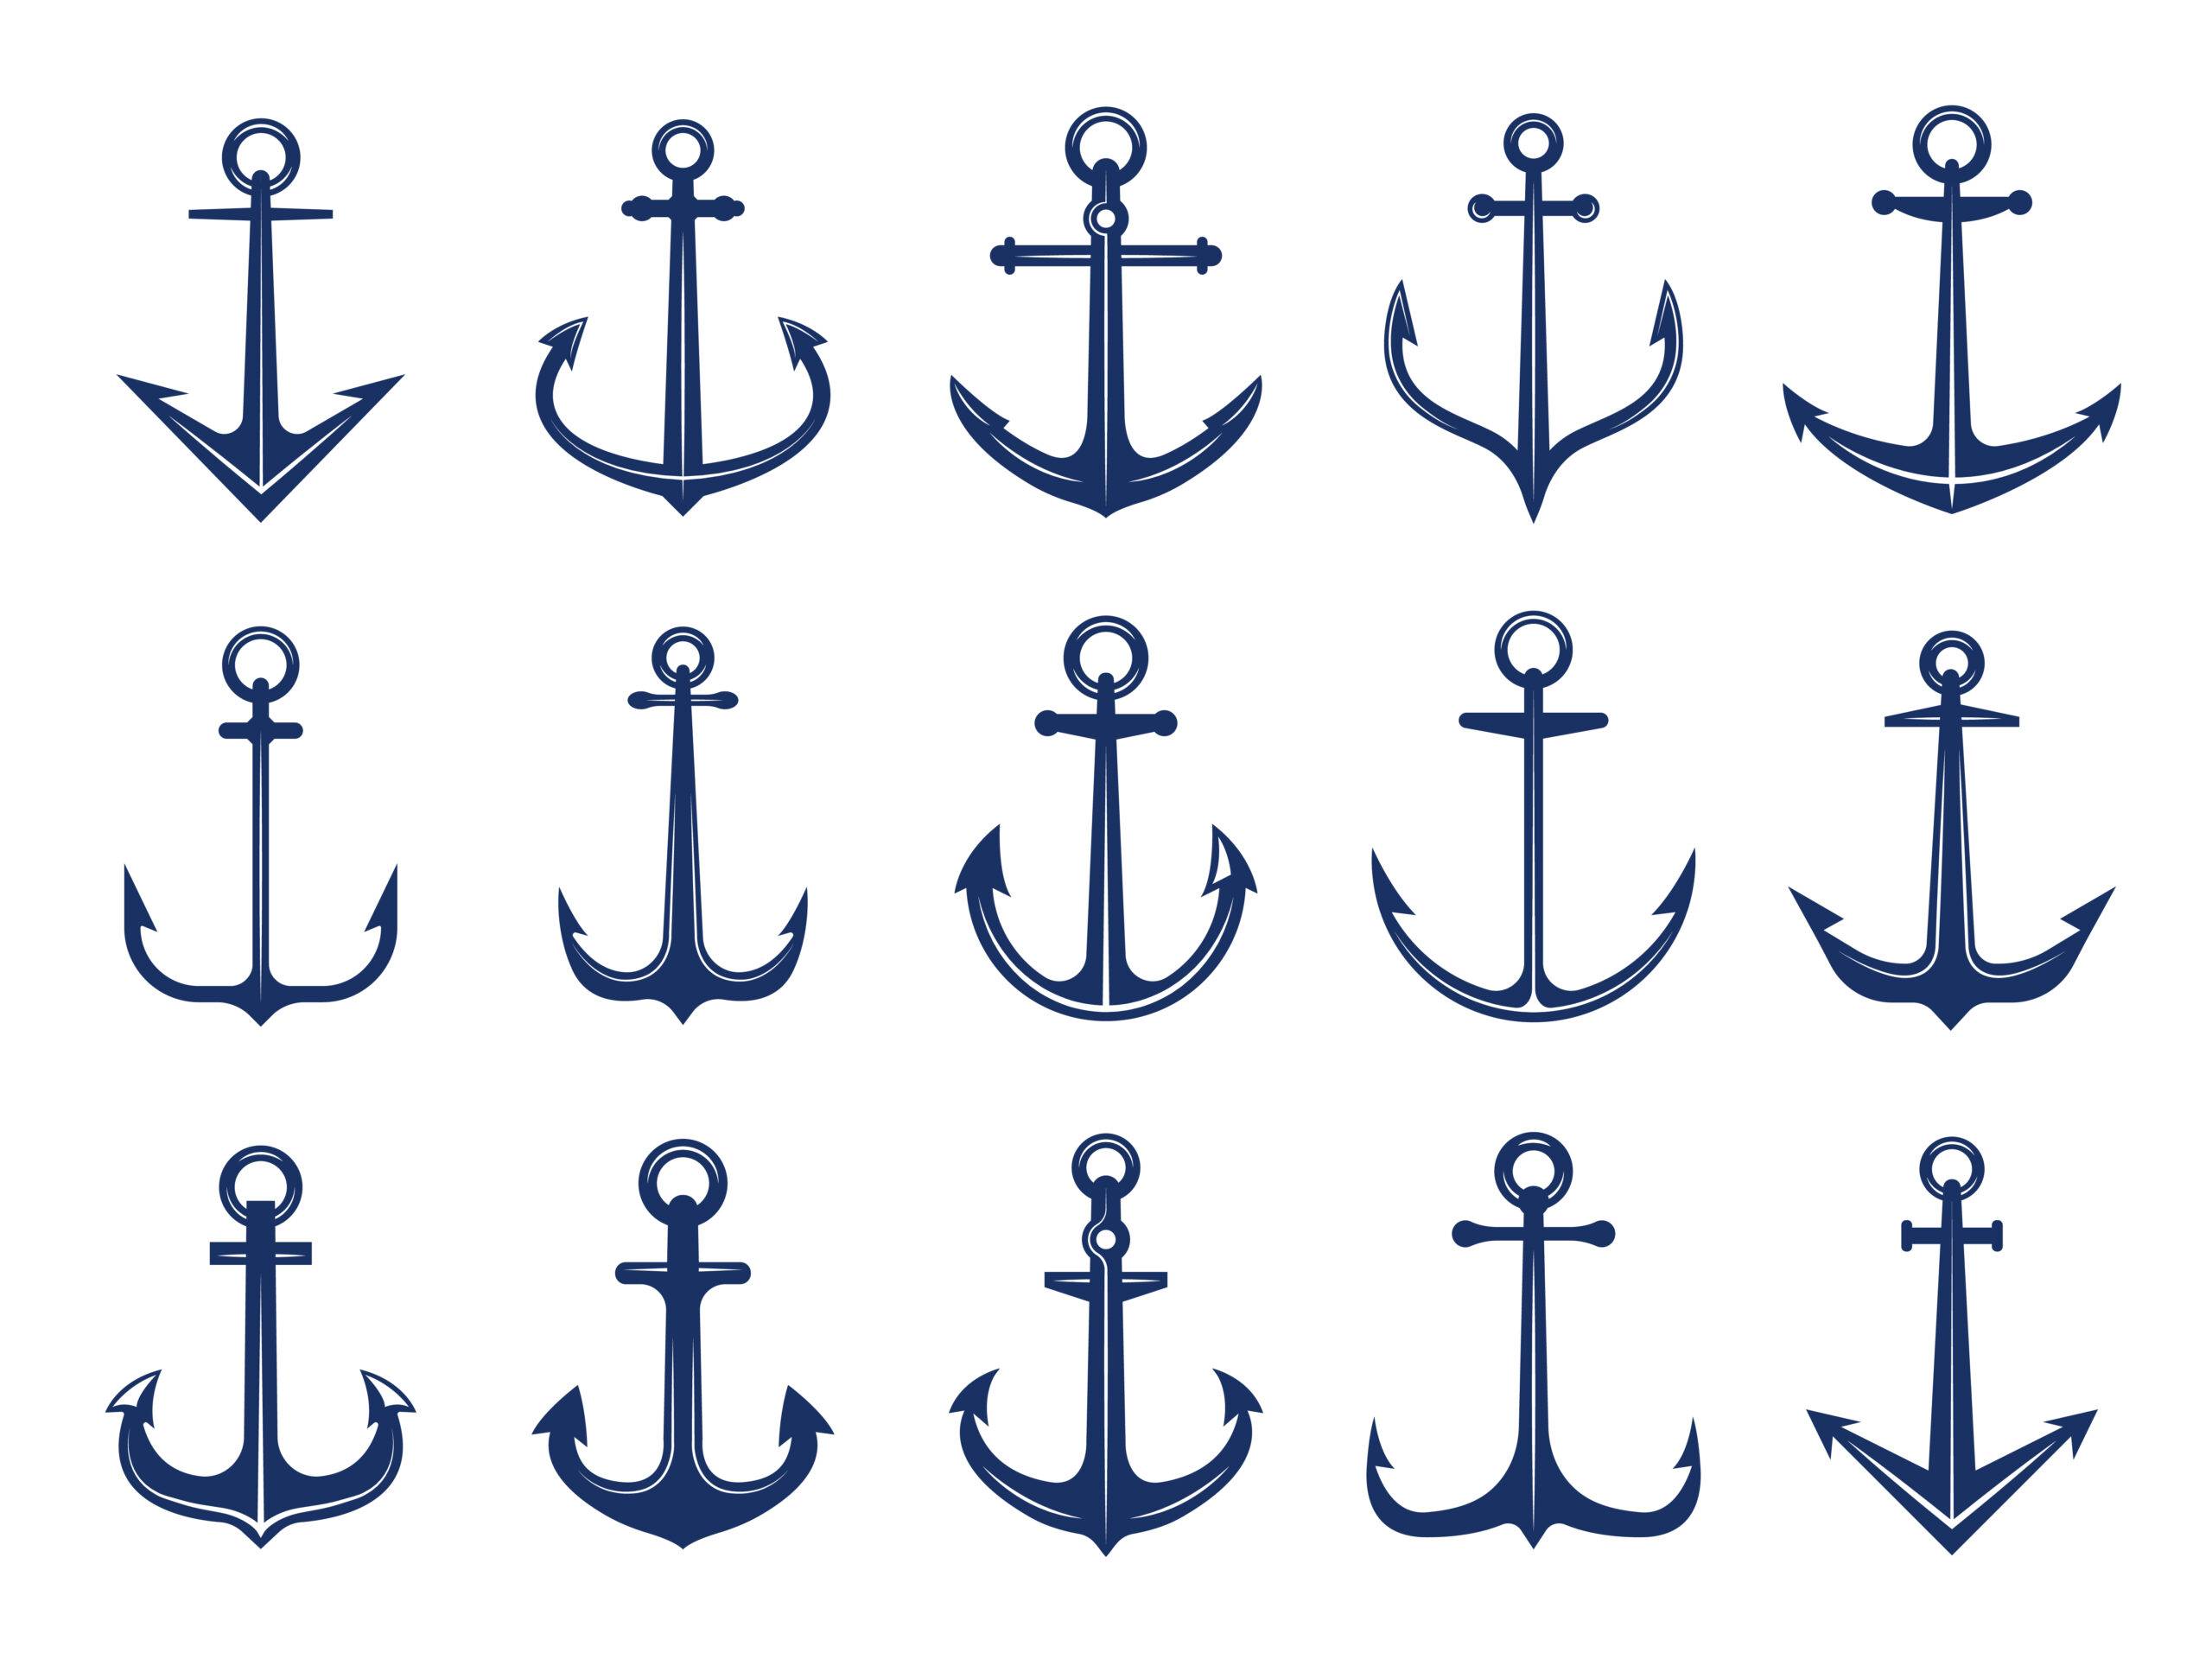 A variety of blue anchor icons arranged in a grid on a white background.